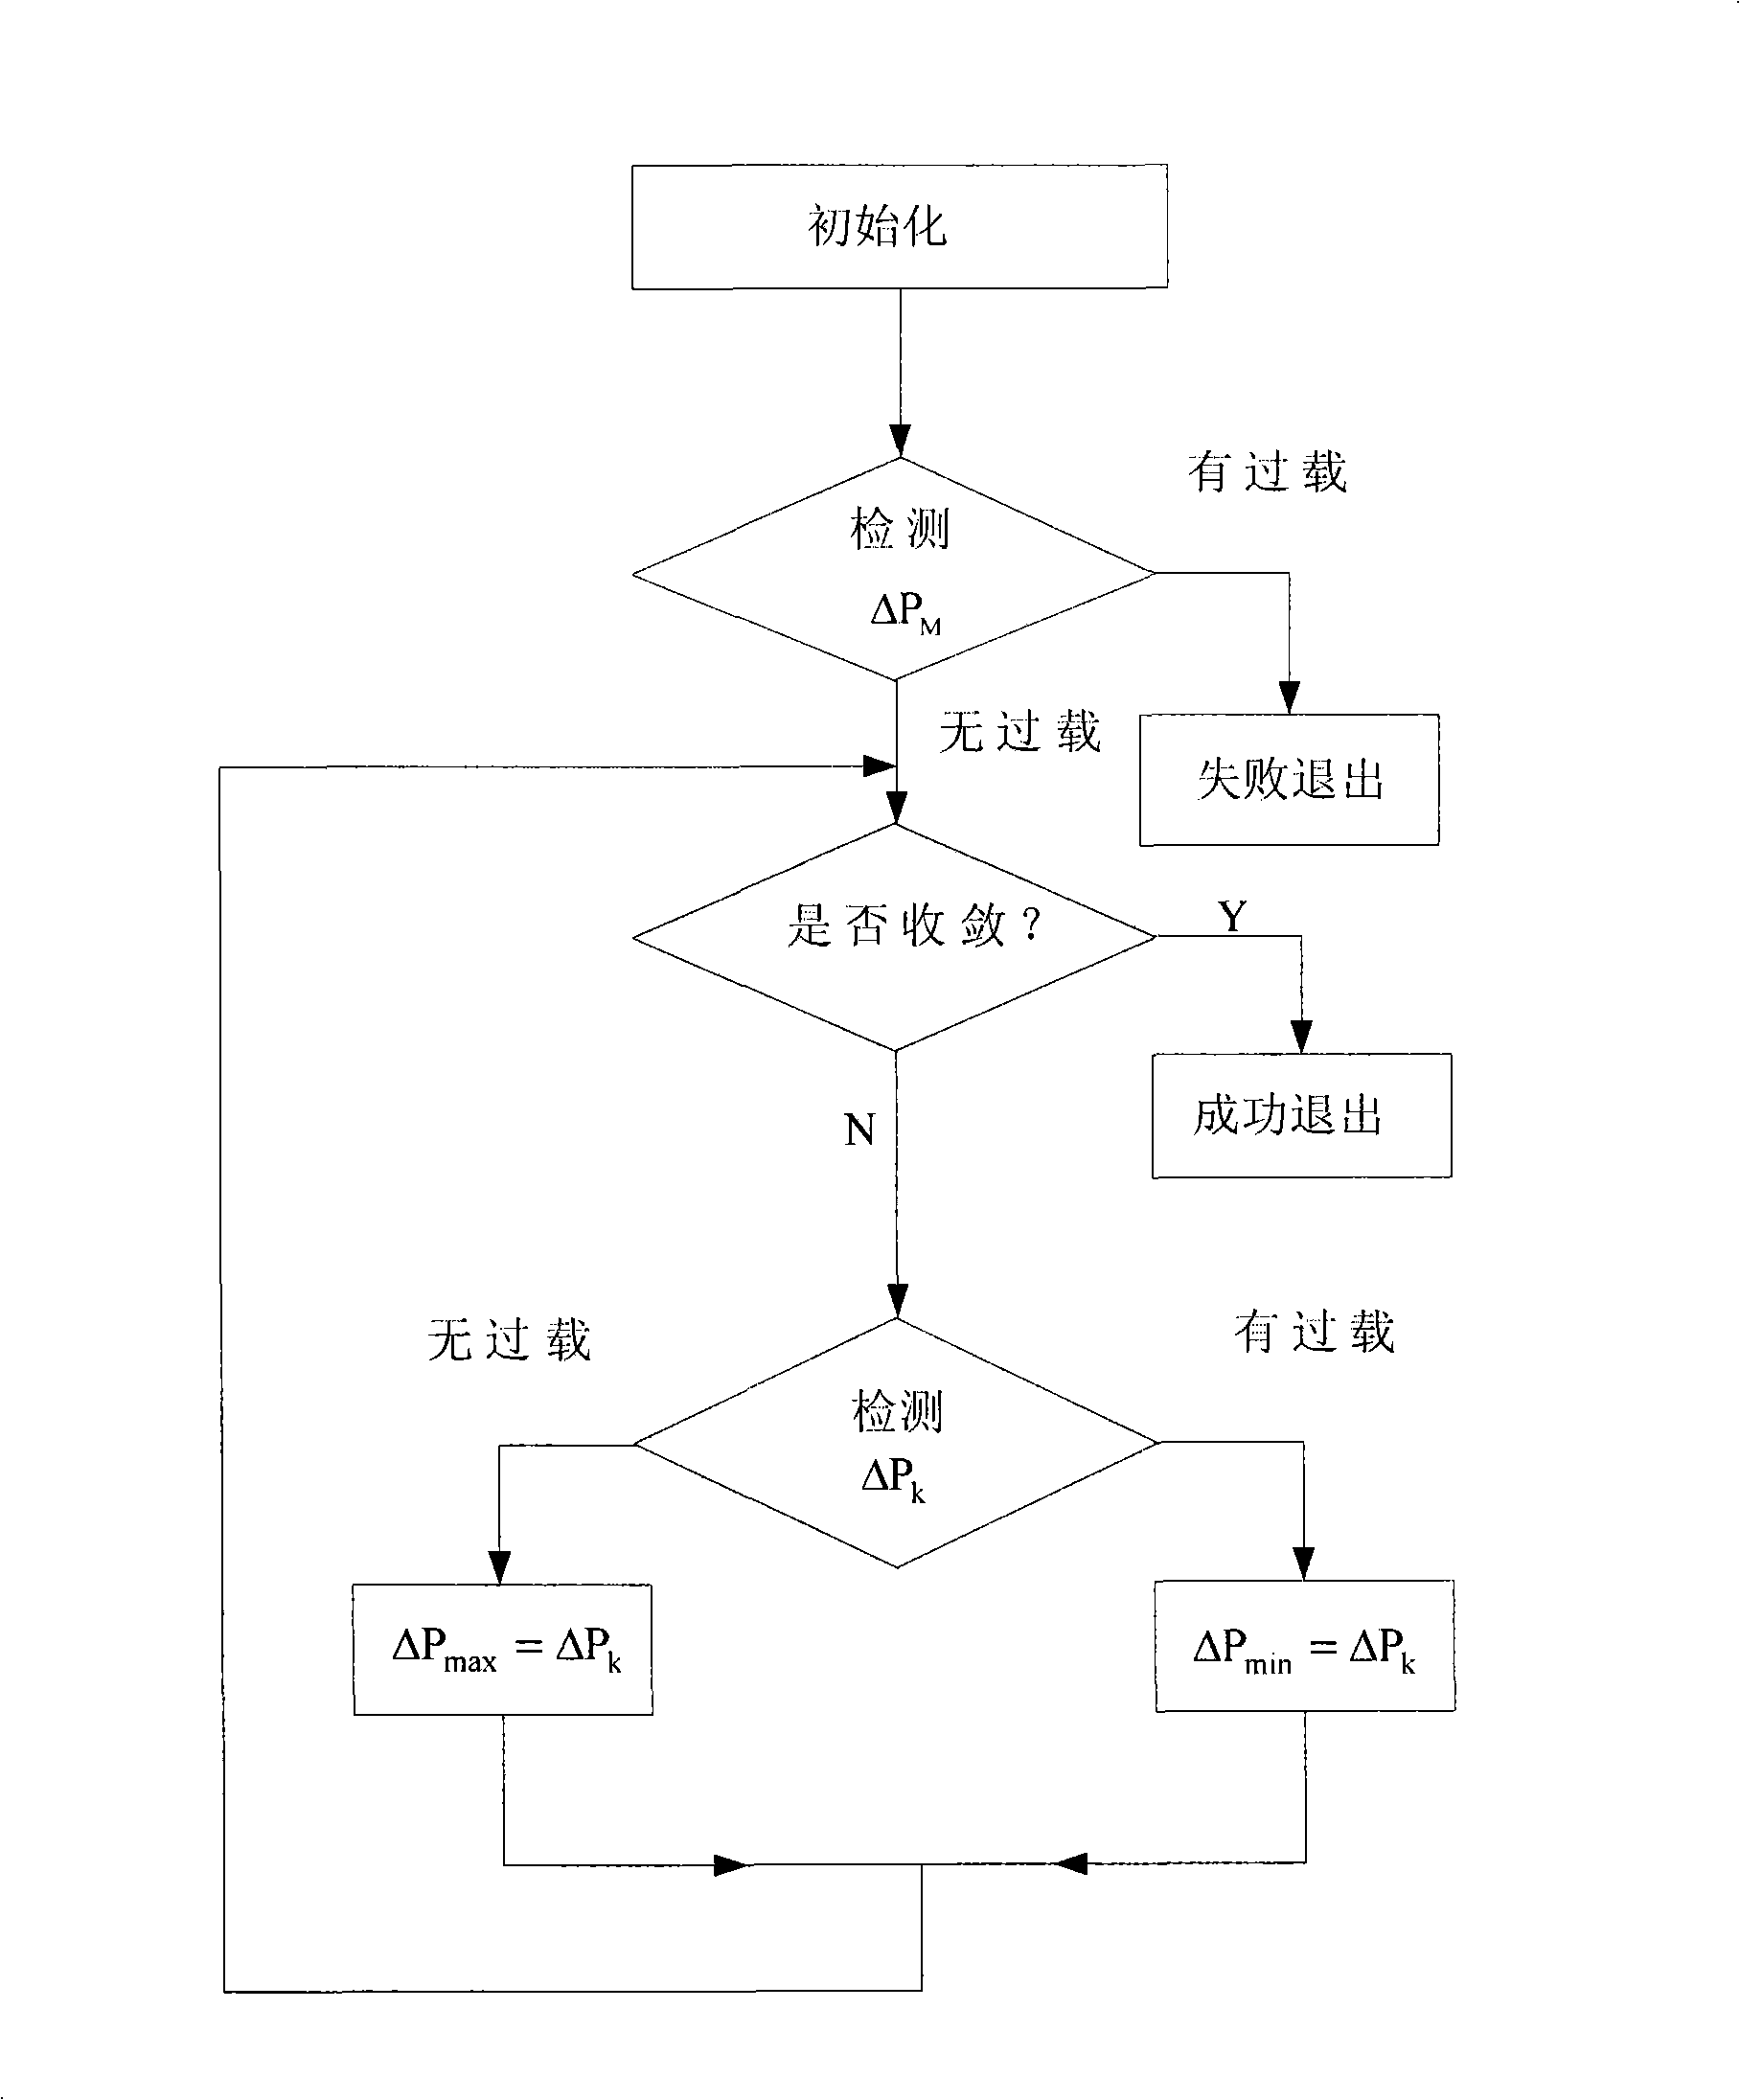 Centralized decision-making real time emergency control method for large electric network overloading